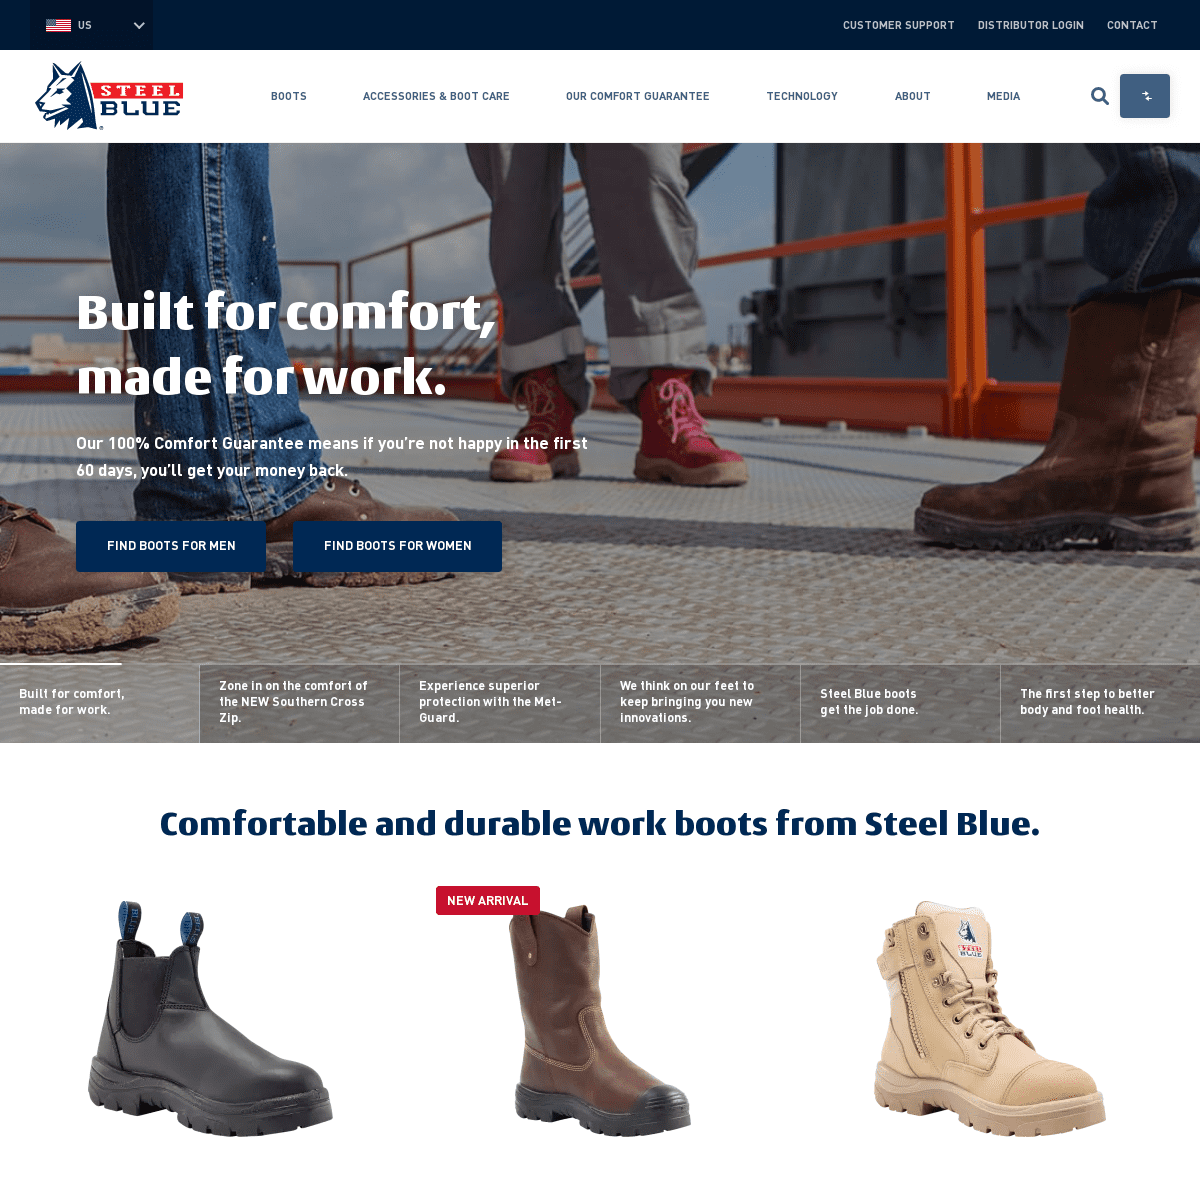 Steel Blue Work Boots Are 100% Comfort Guaranteed | Steel Blue USA